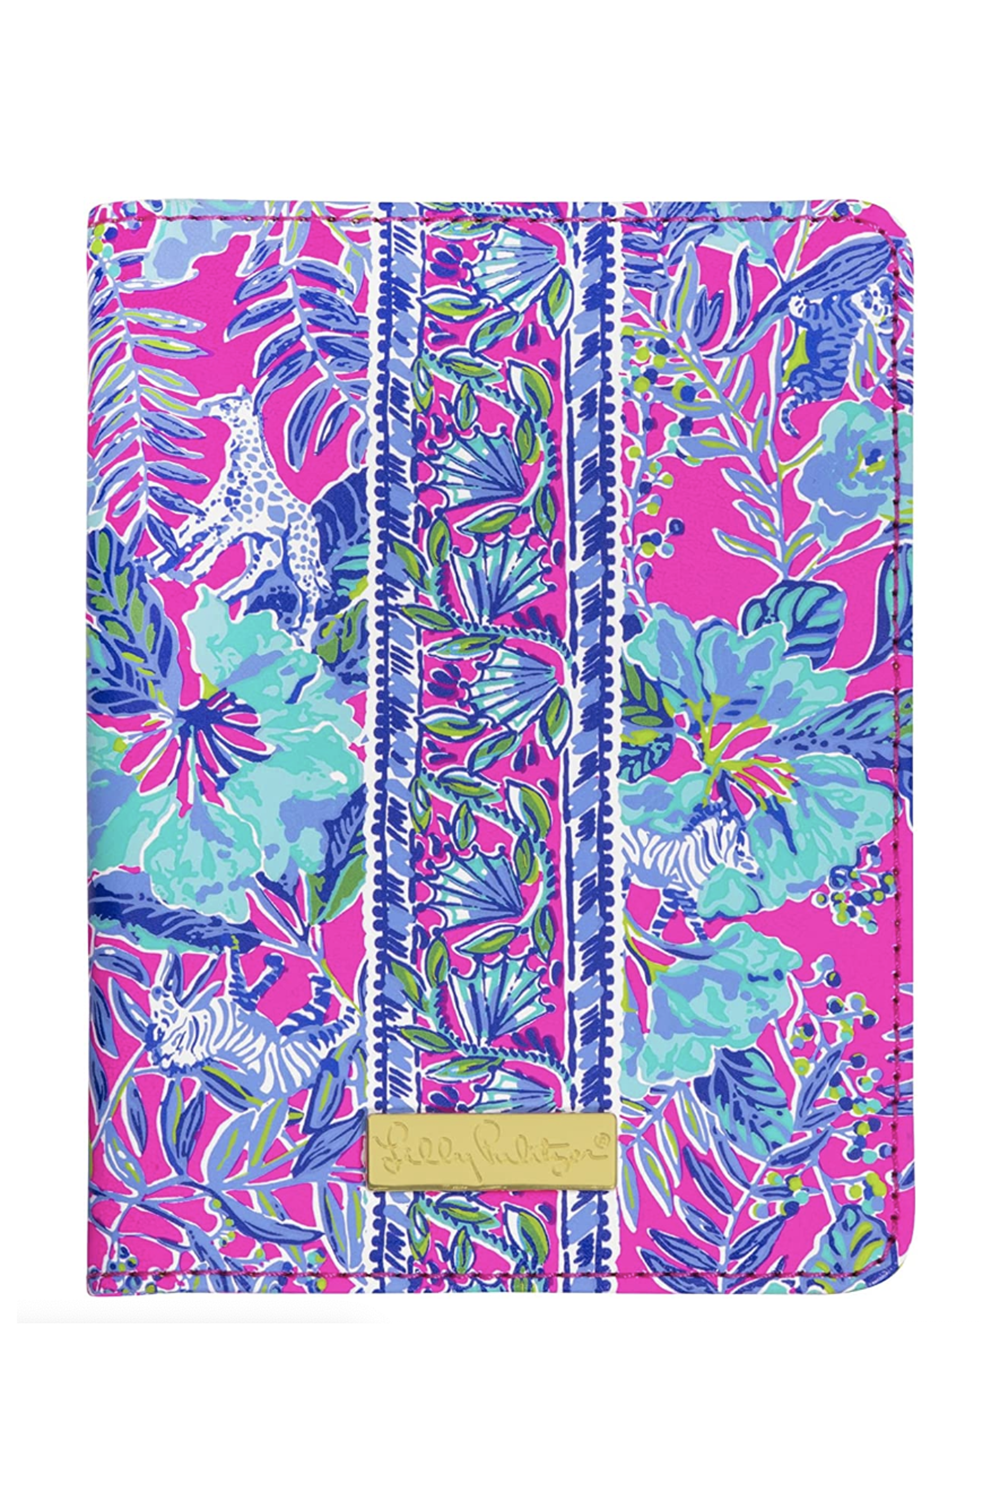 Lilly Passport Cover - Lil Earned Stripes